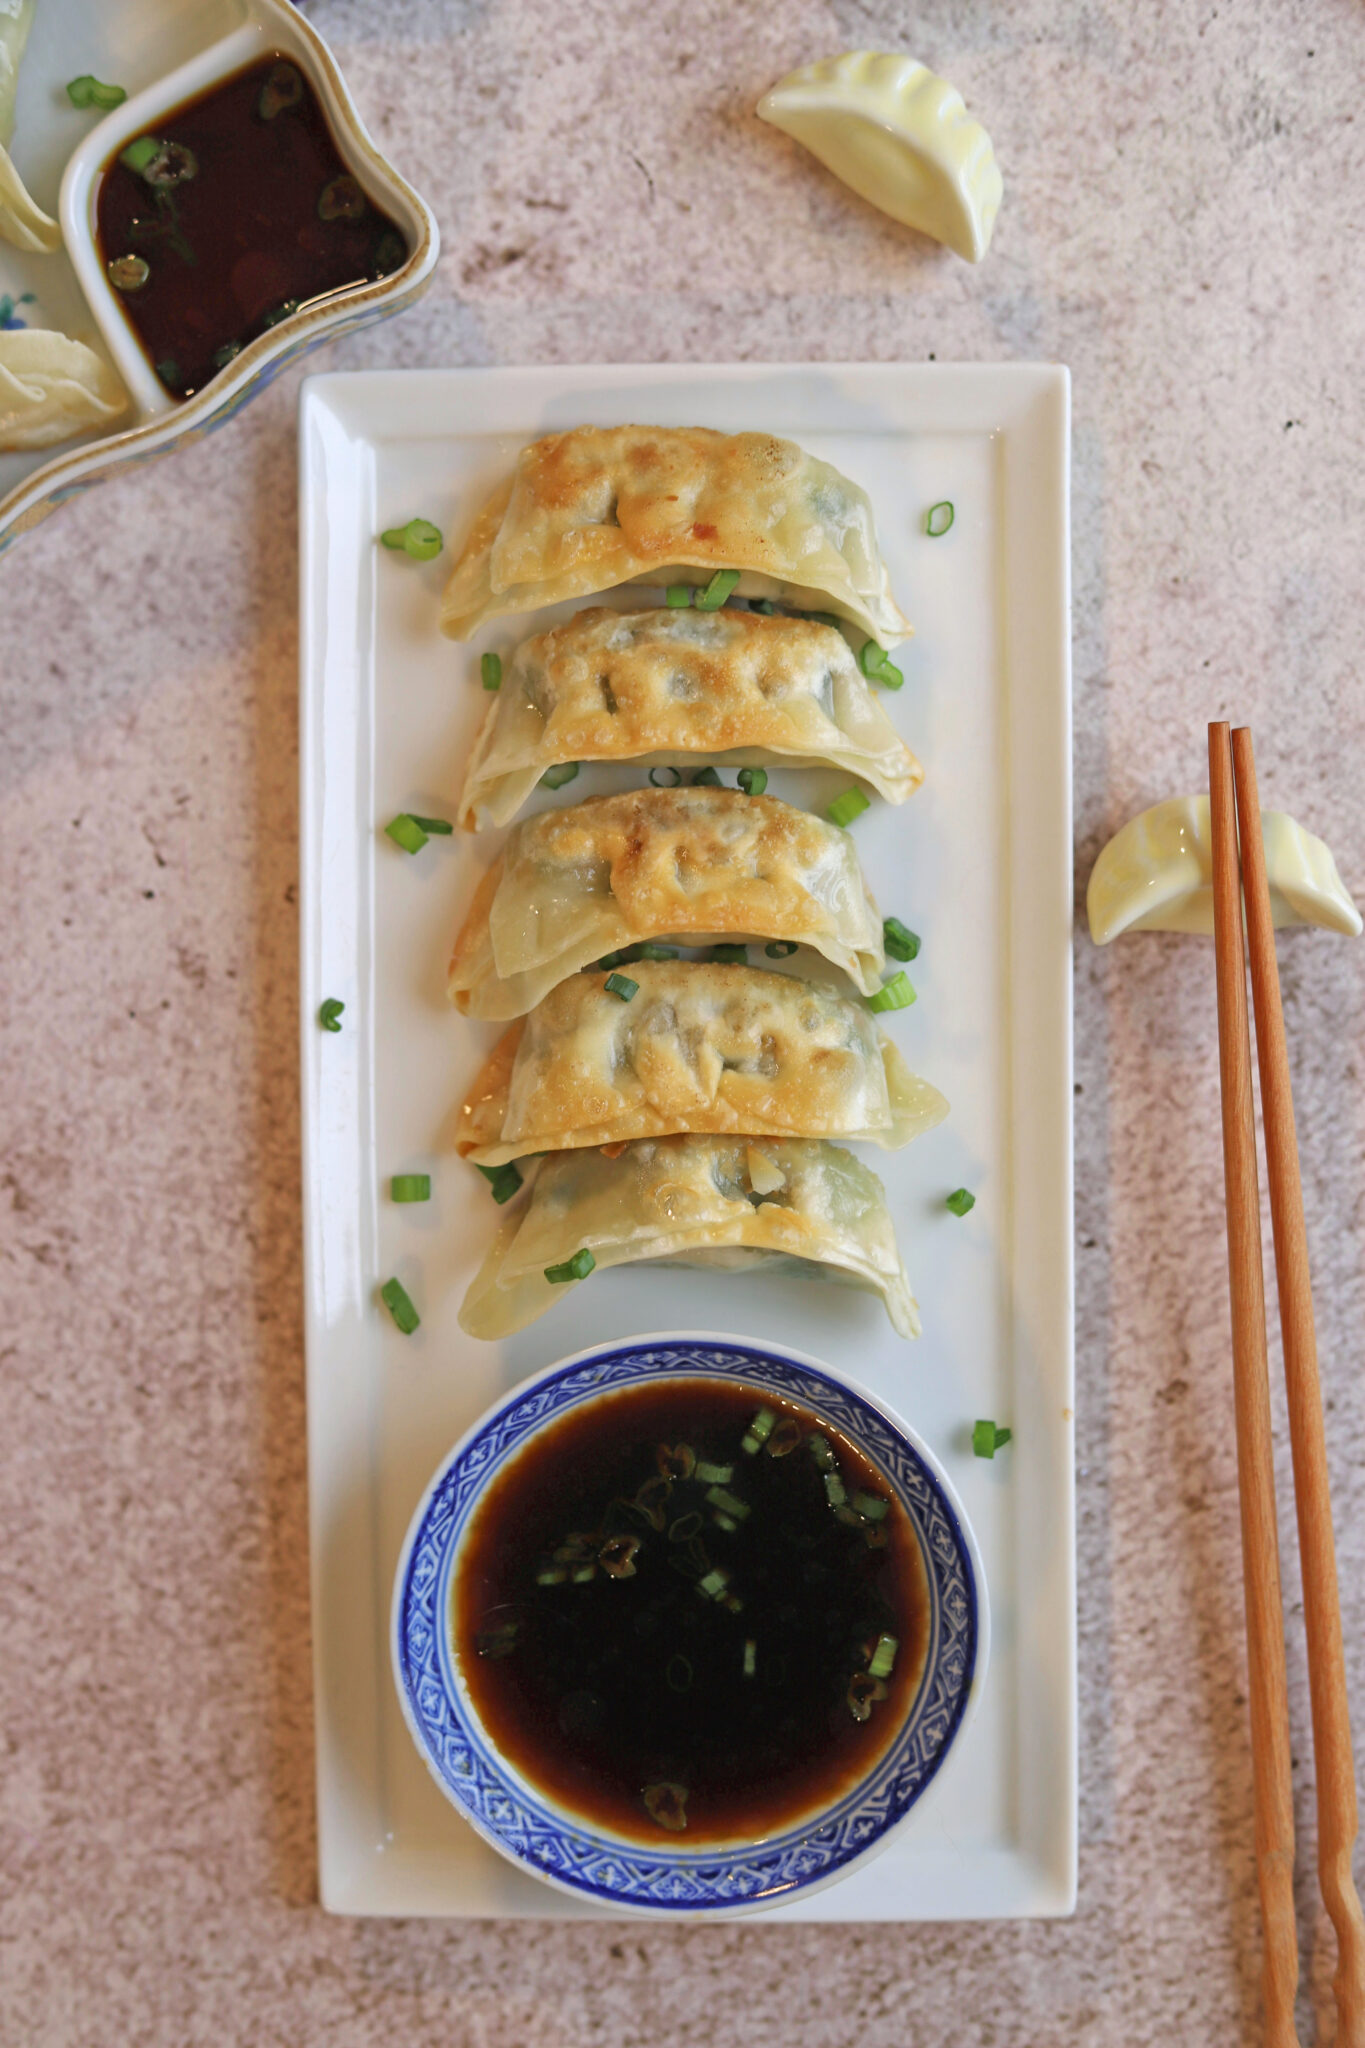 Gyoza on platter with dipping sauce by chopsticks.